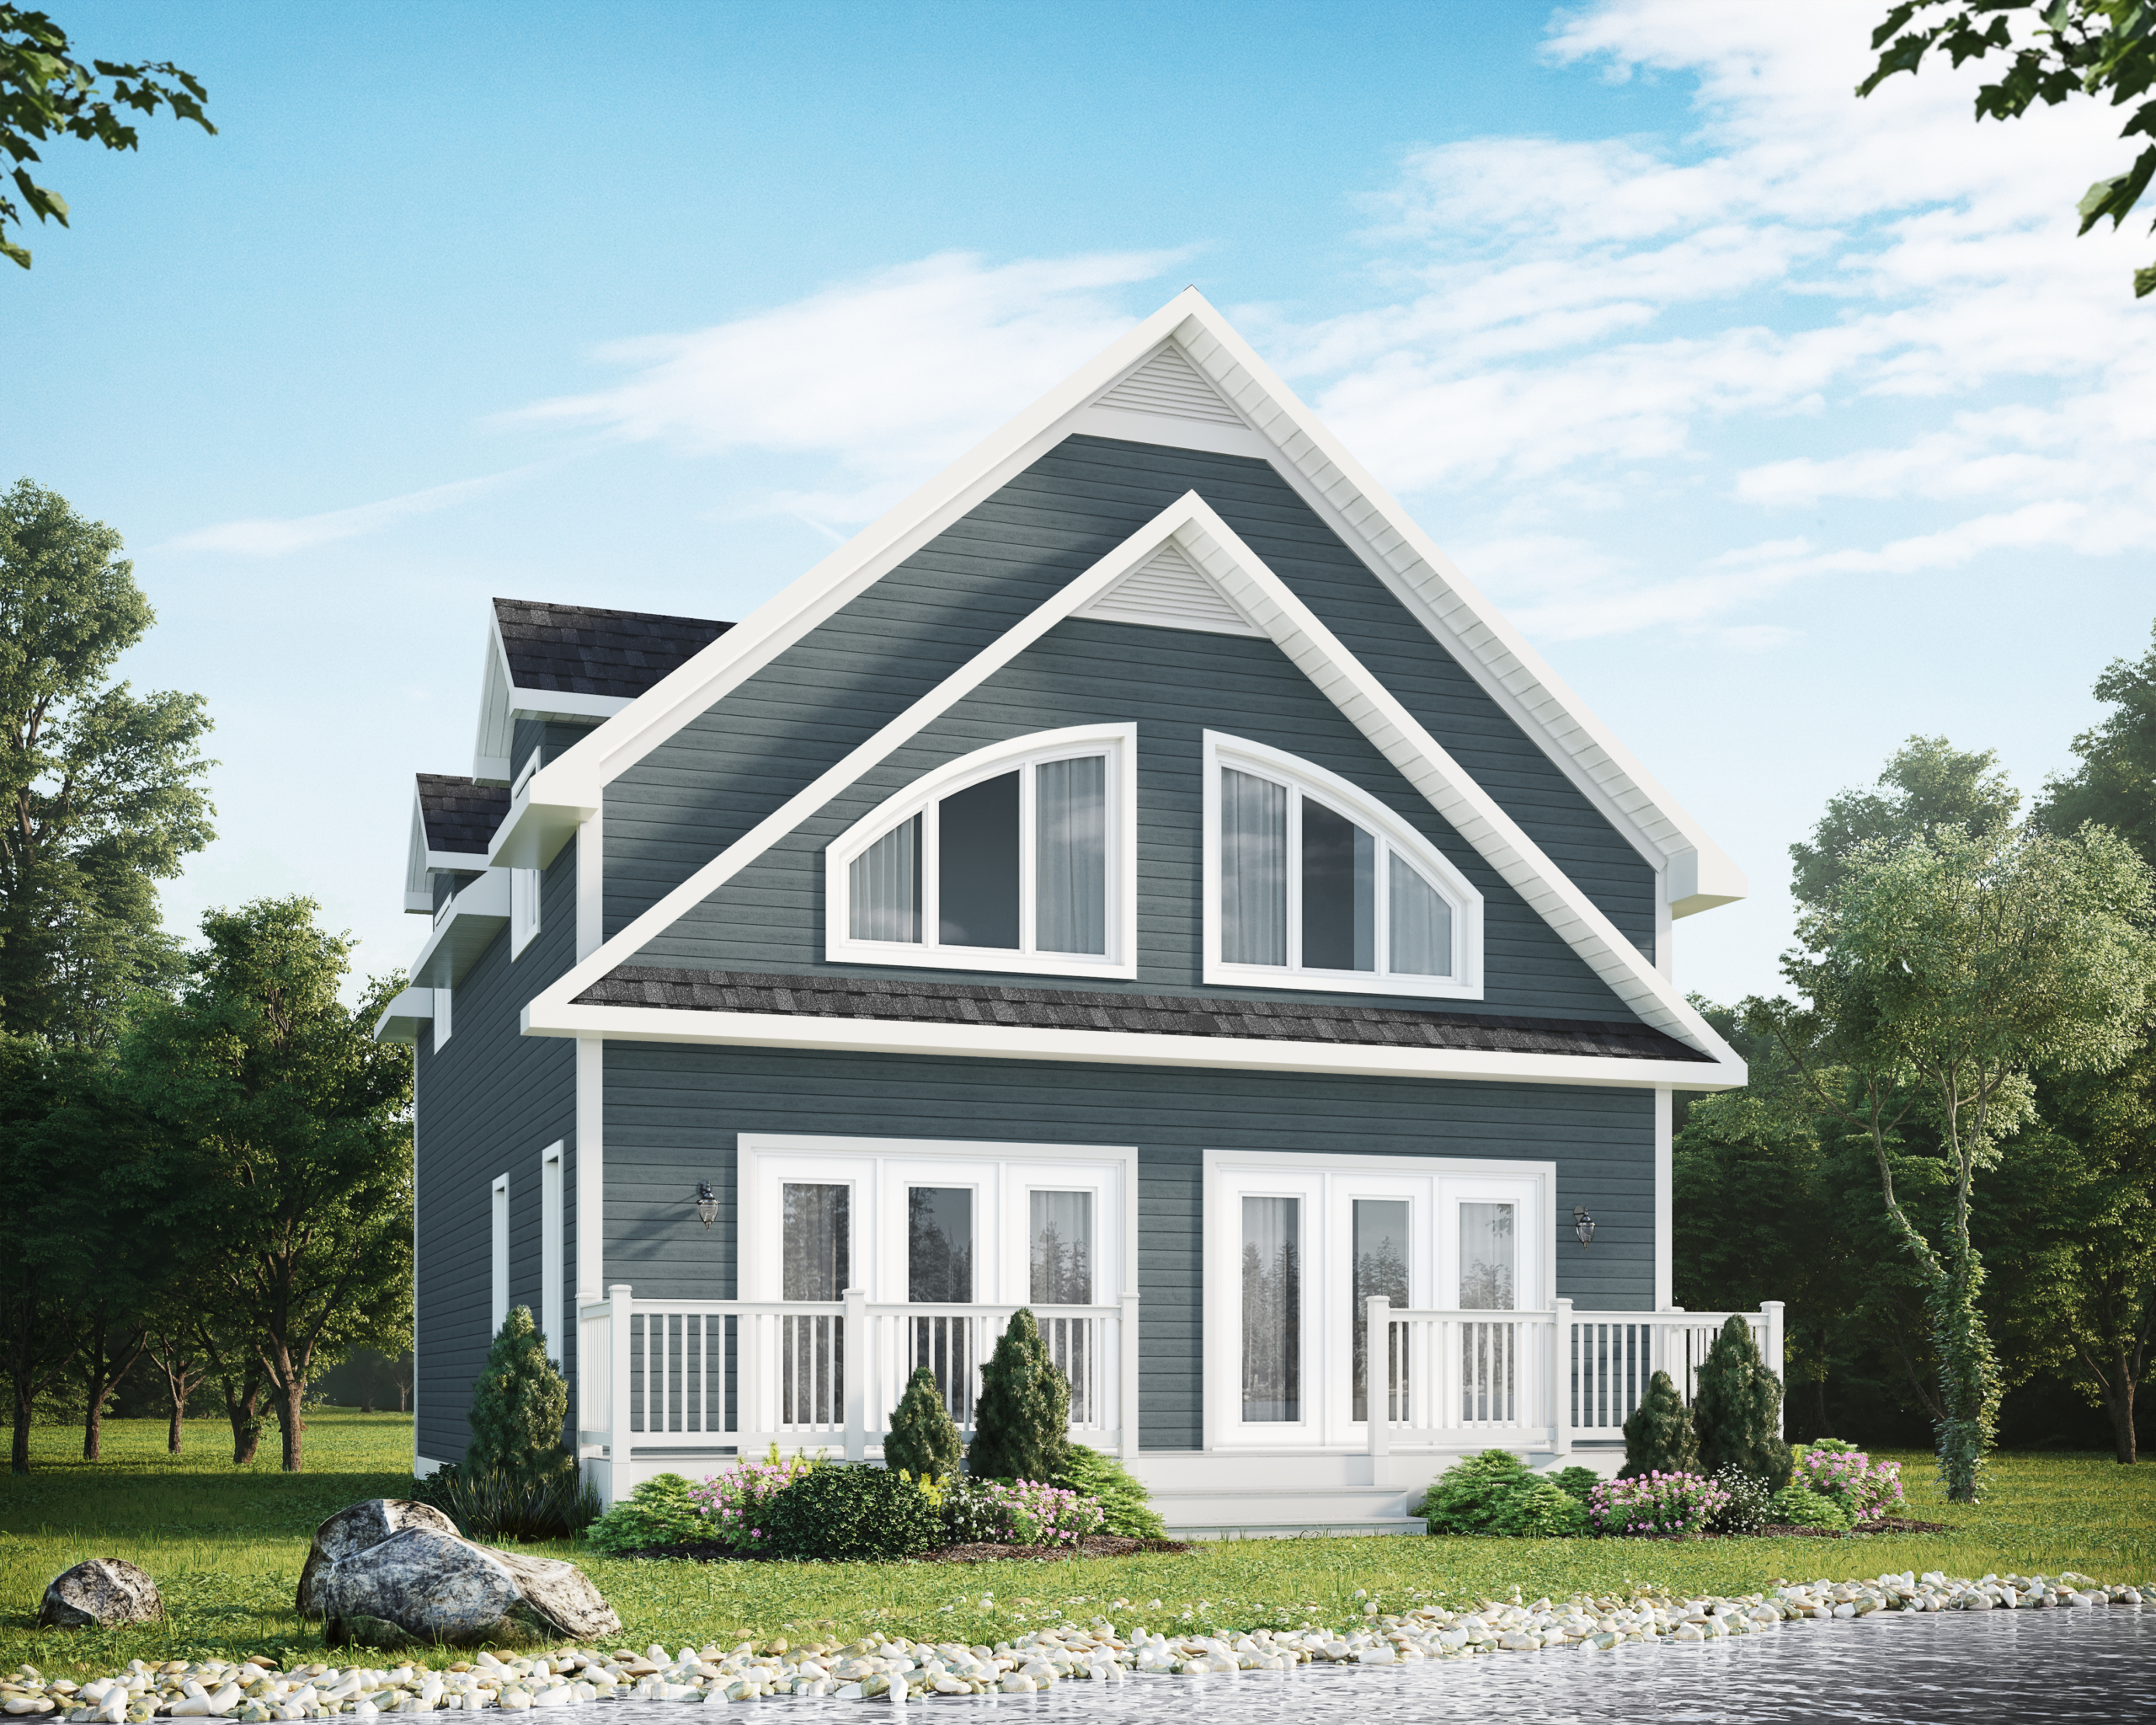 Glen Orchard exterior elevation from Quality Homes